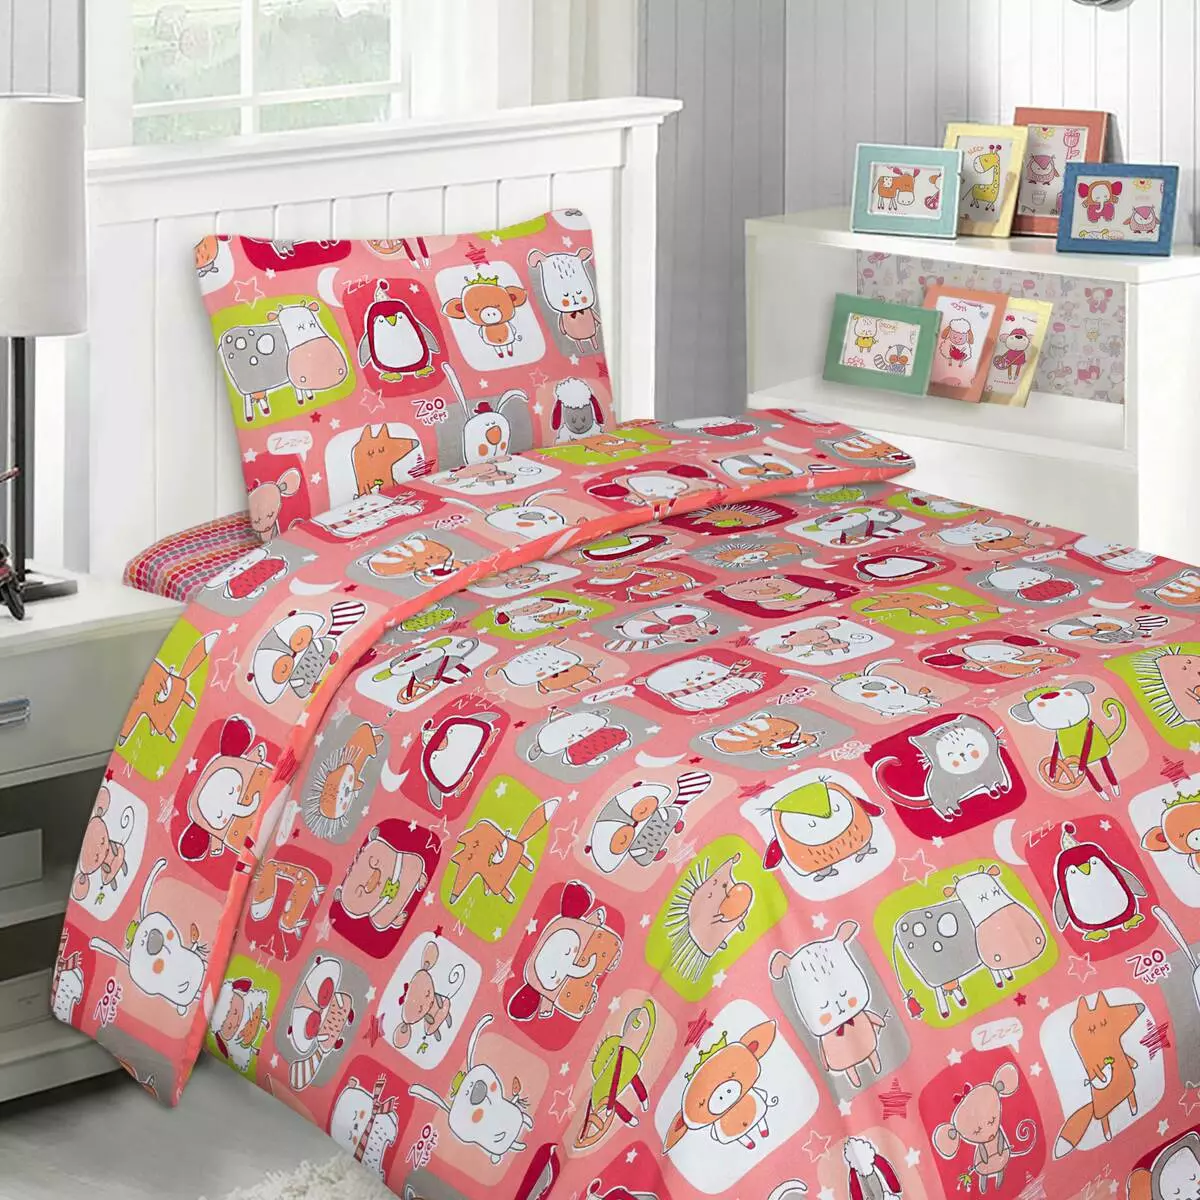 Bed linen MONA LIZA: Satin and Bosi kits, Euro and children's sets from the manufacturer, customer reviews 25829_2